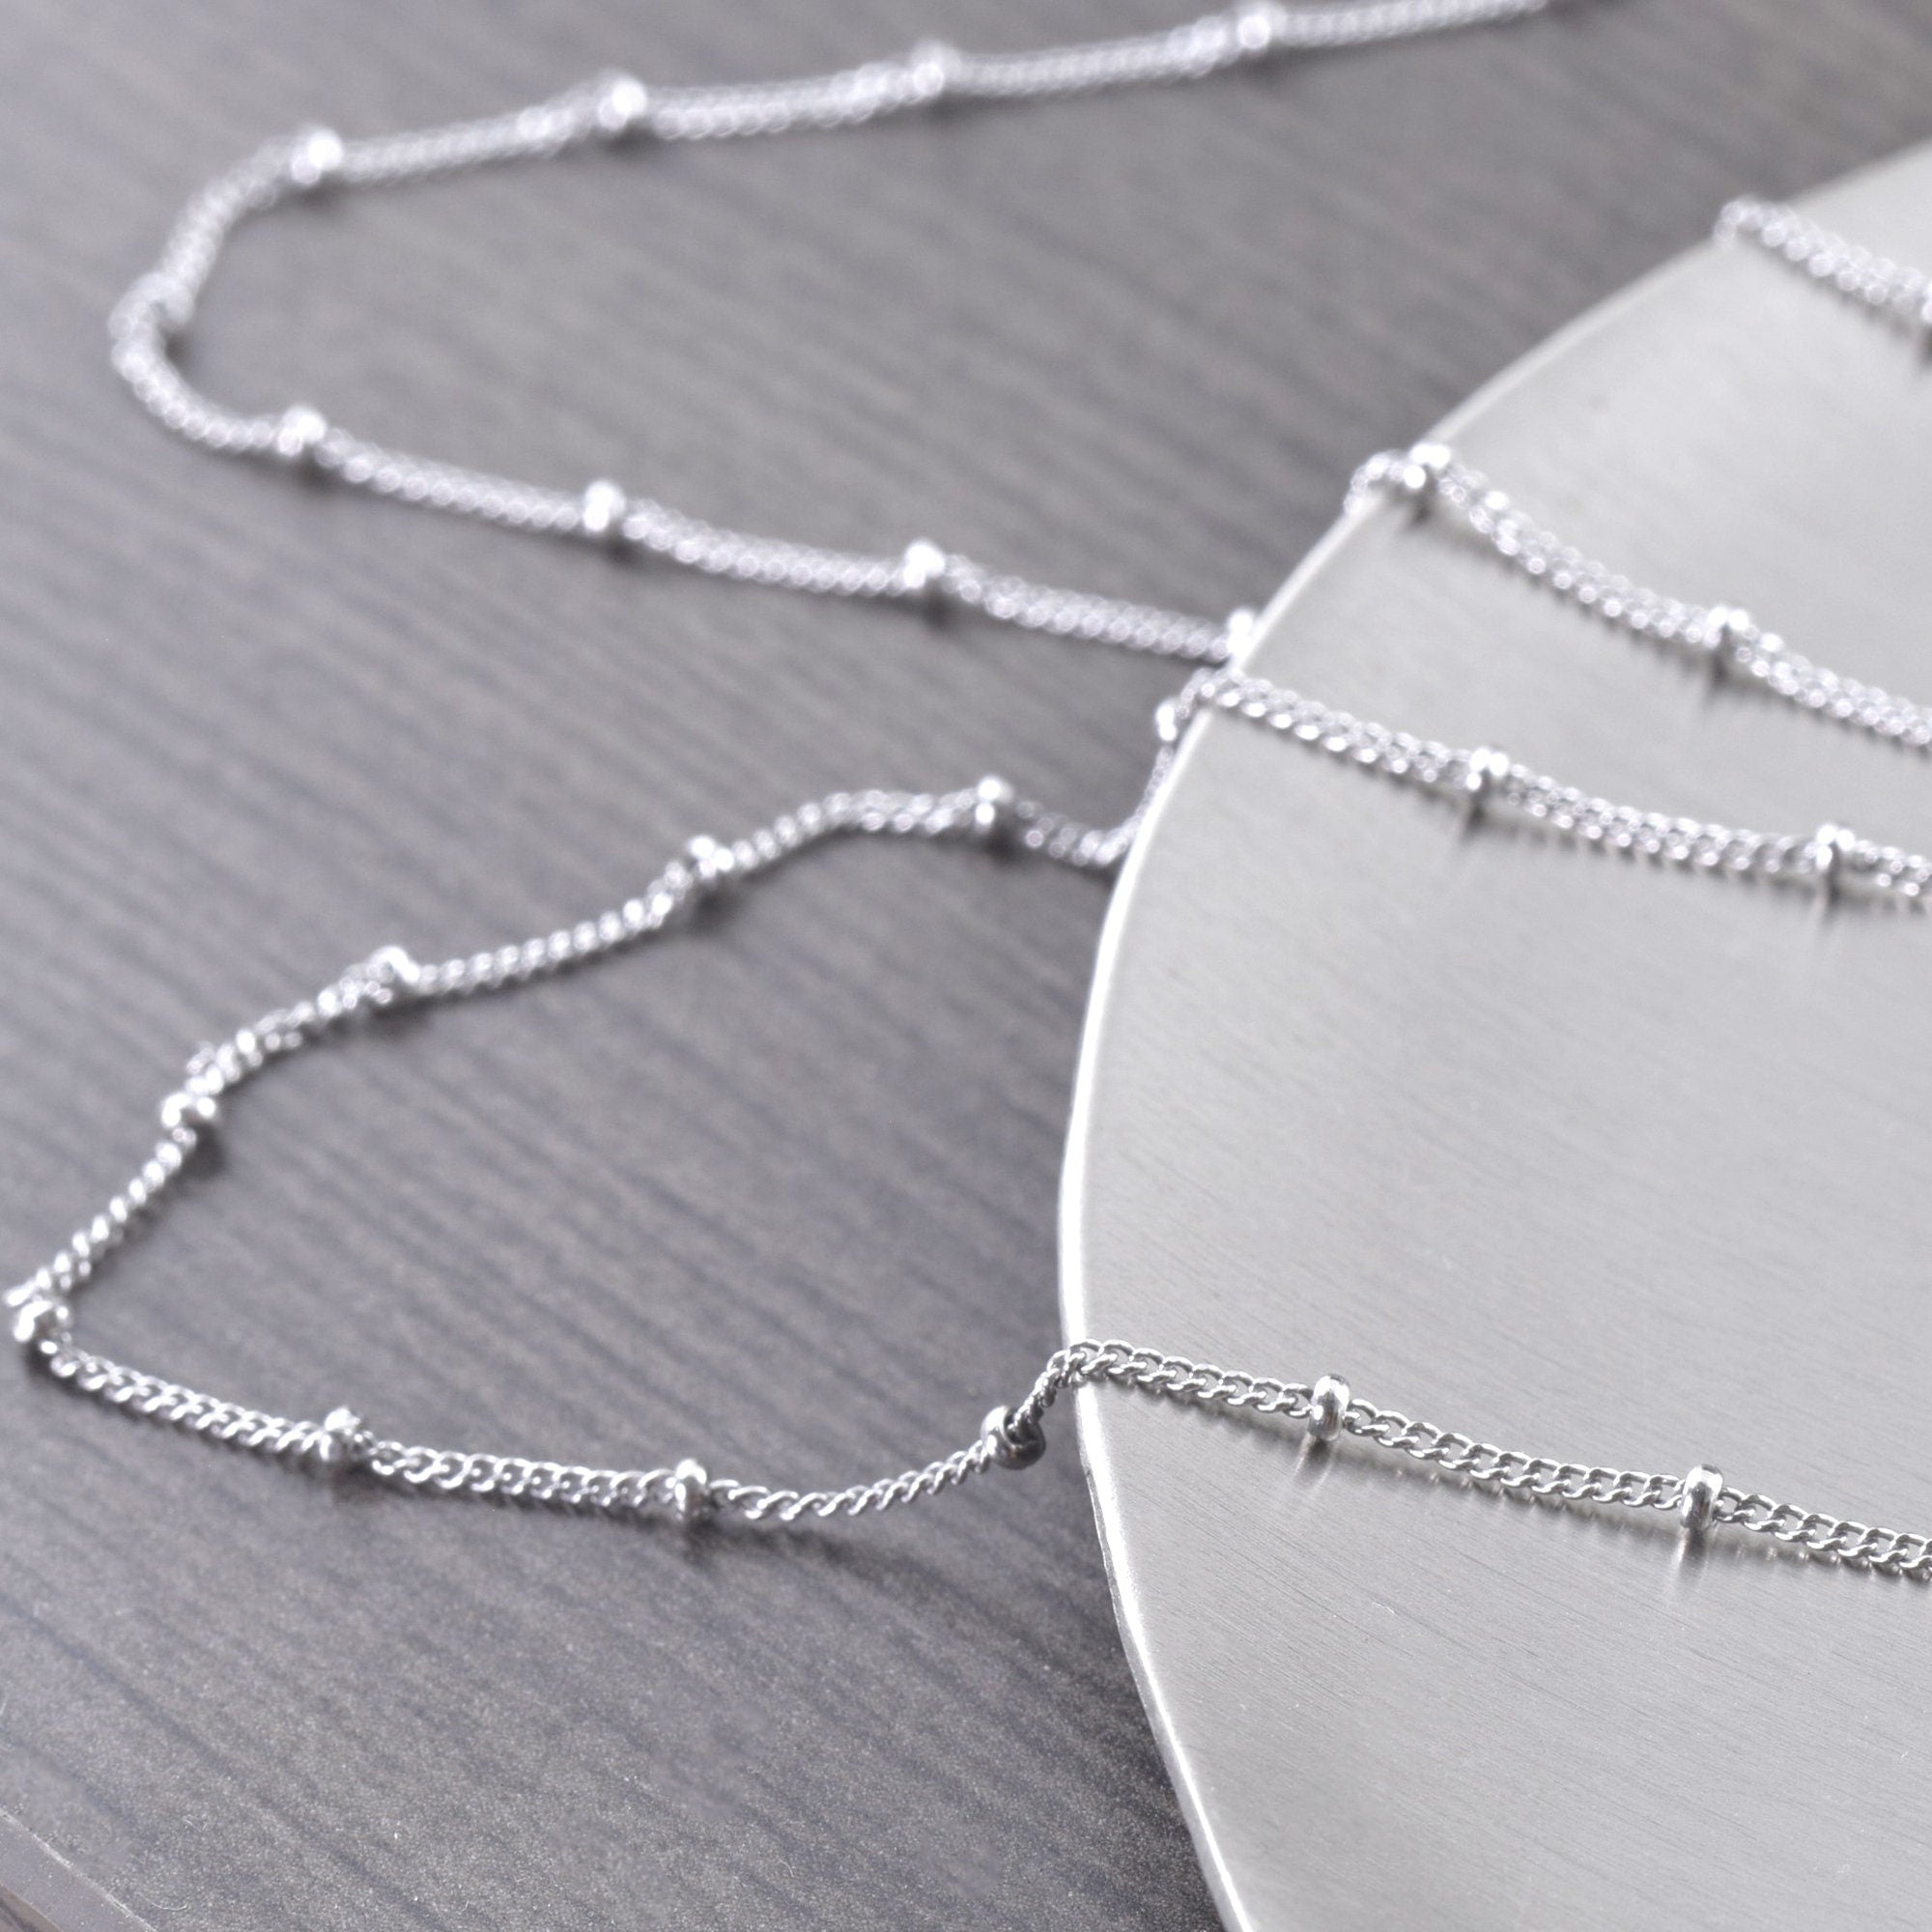 Rhodium plated 925 Sterling Silver Chain necklace, thin beaded satellite Italian chain, 16 inch, 18 inch, 20 inch, Unisex jewelry